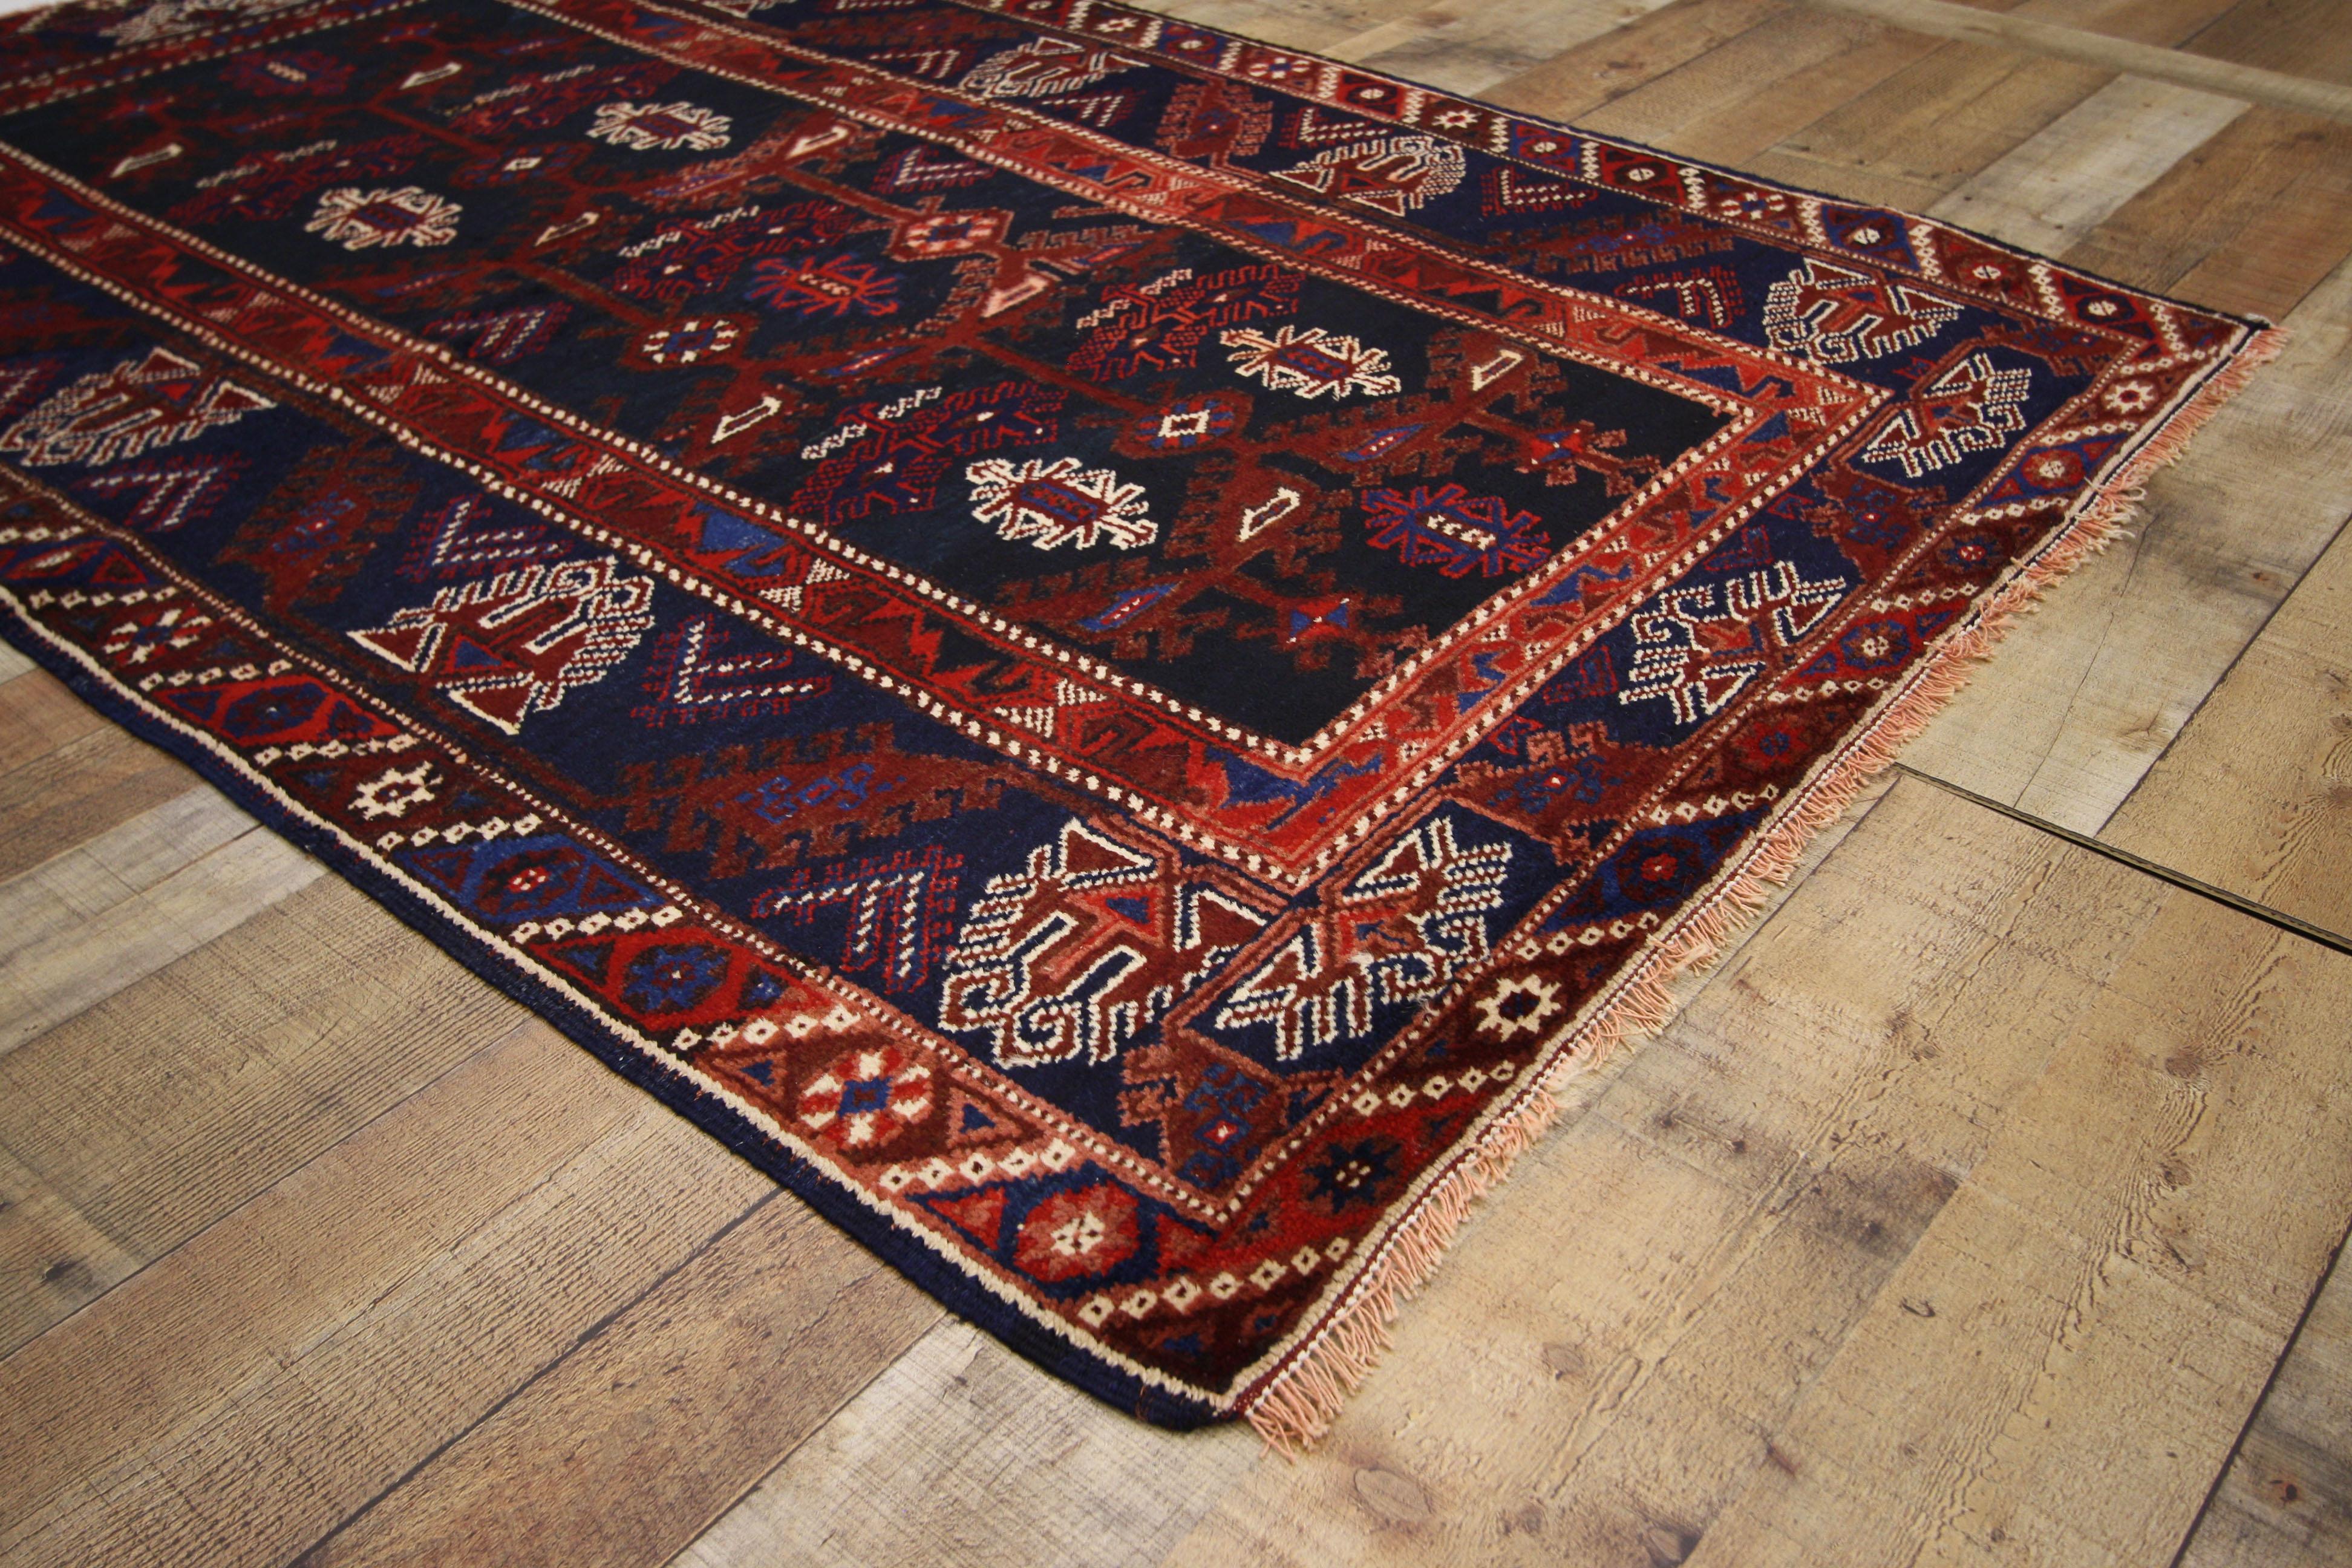 74647, antique Afghani tribal rug or kitchen, bath, foyer or entryway. This hand-knotted wool antique Afghani tribal rug features a geometric pattern in a saturated color palette. Immersed in Afghani history and elements of contrast, this antique